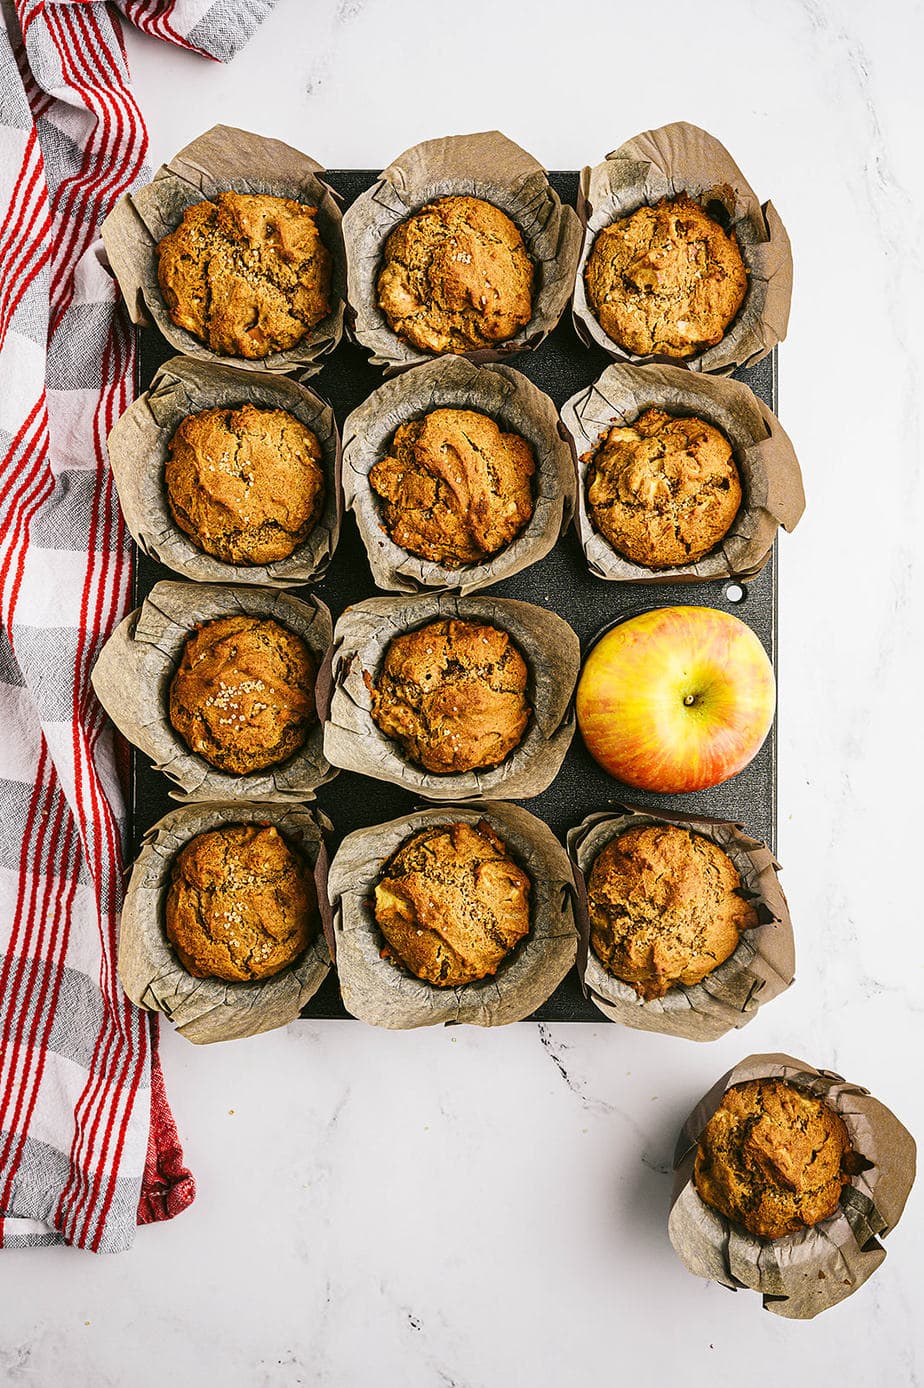 Overhead photo: muffin tin full of cooked muffins with a whole apple taking one's place.